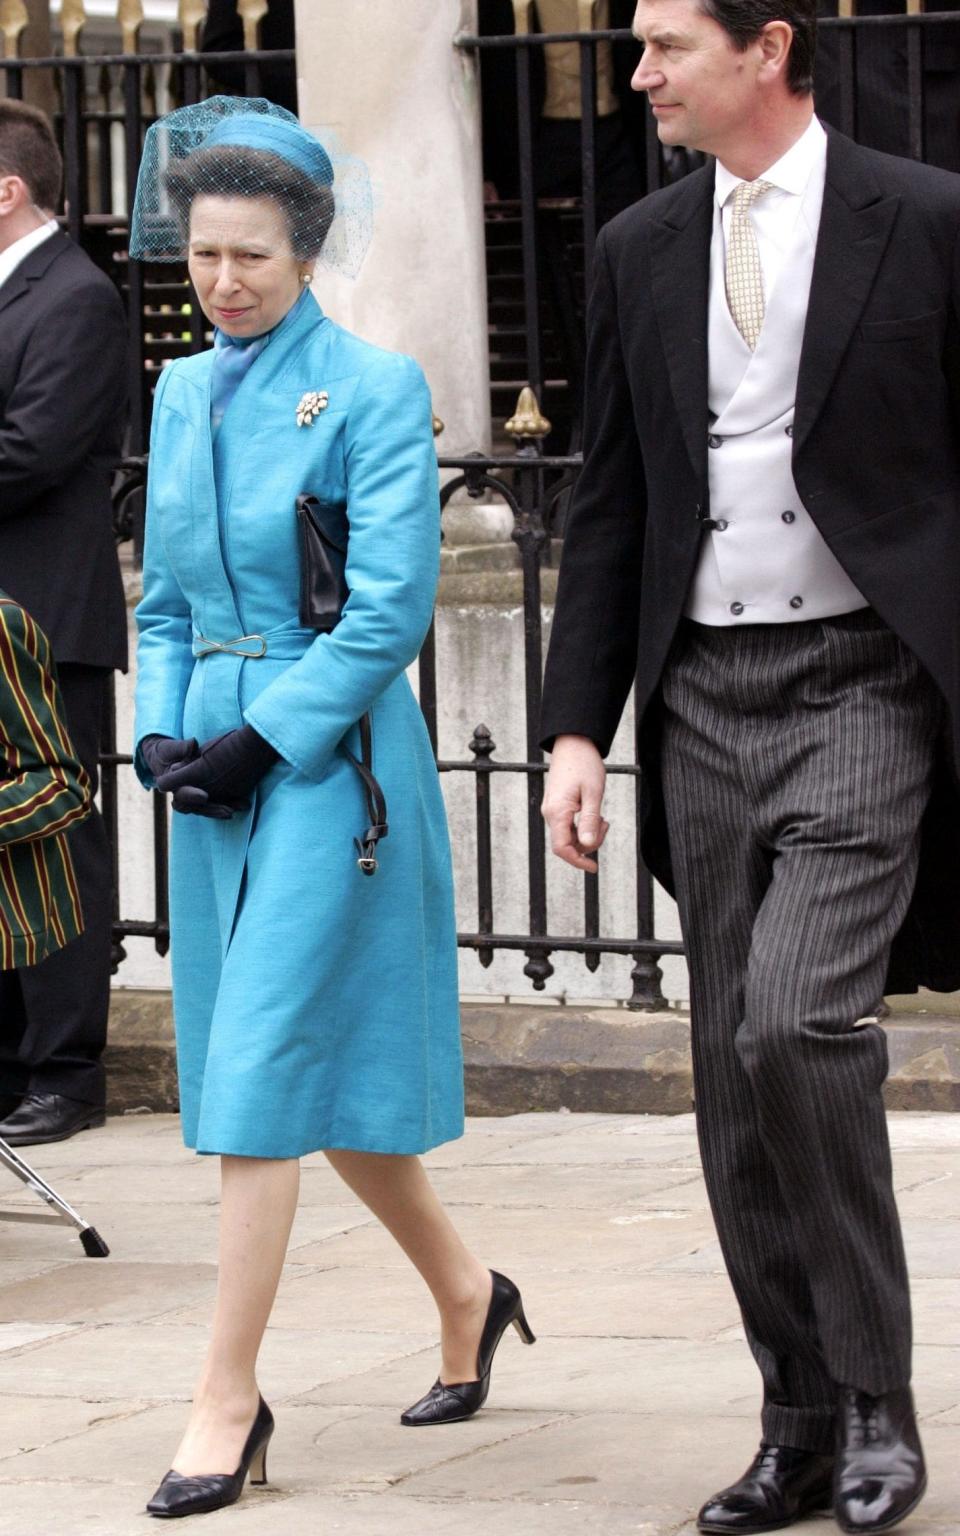 Princess Anne & Tim Laurence Attend The Wedding Of Hrh The Prince Of Wales & Mrs Camilla Parker Bowles - UK Press 